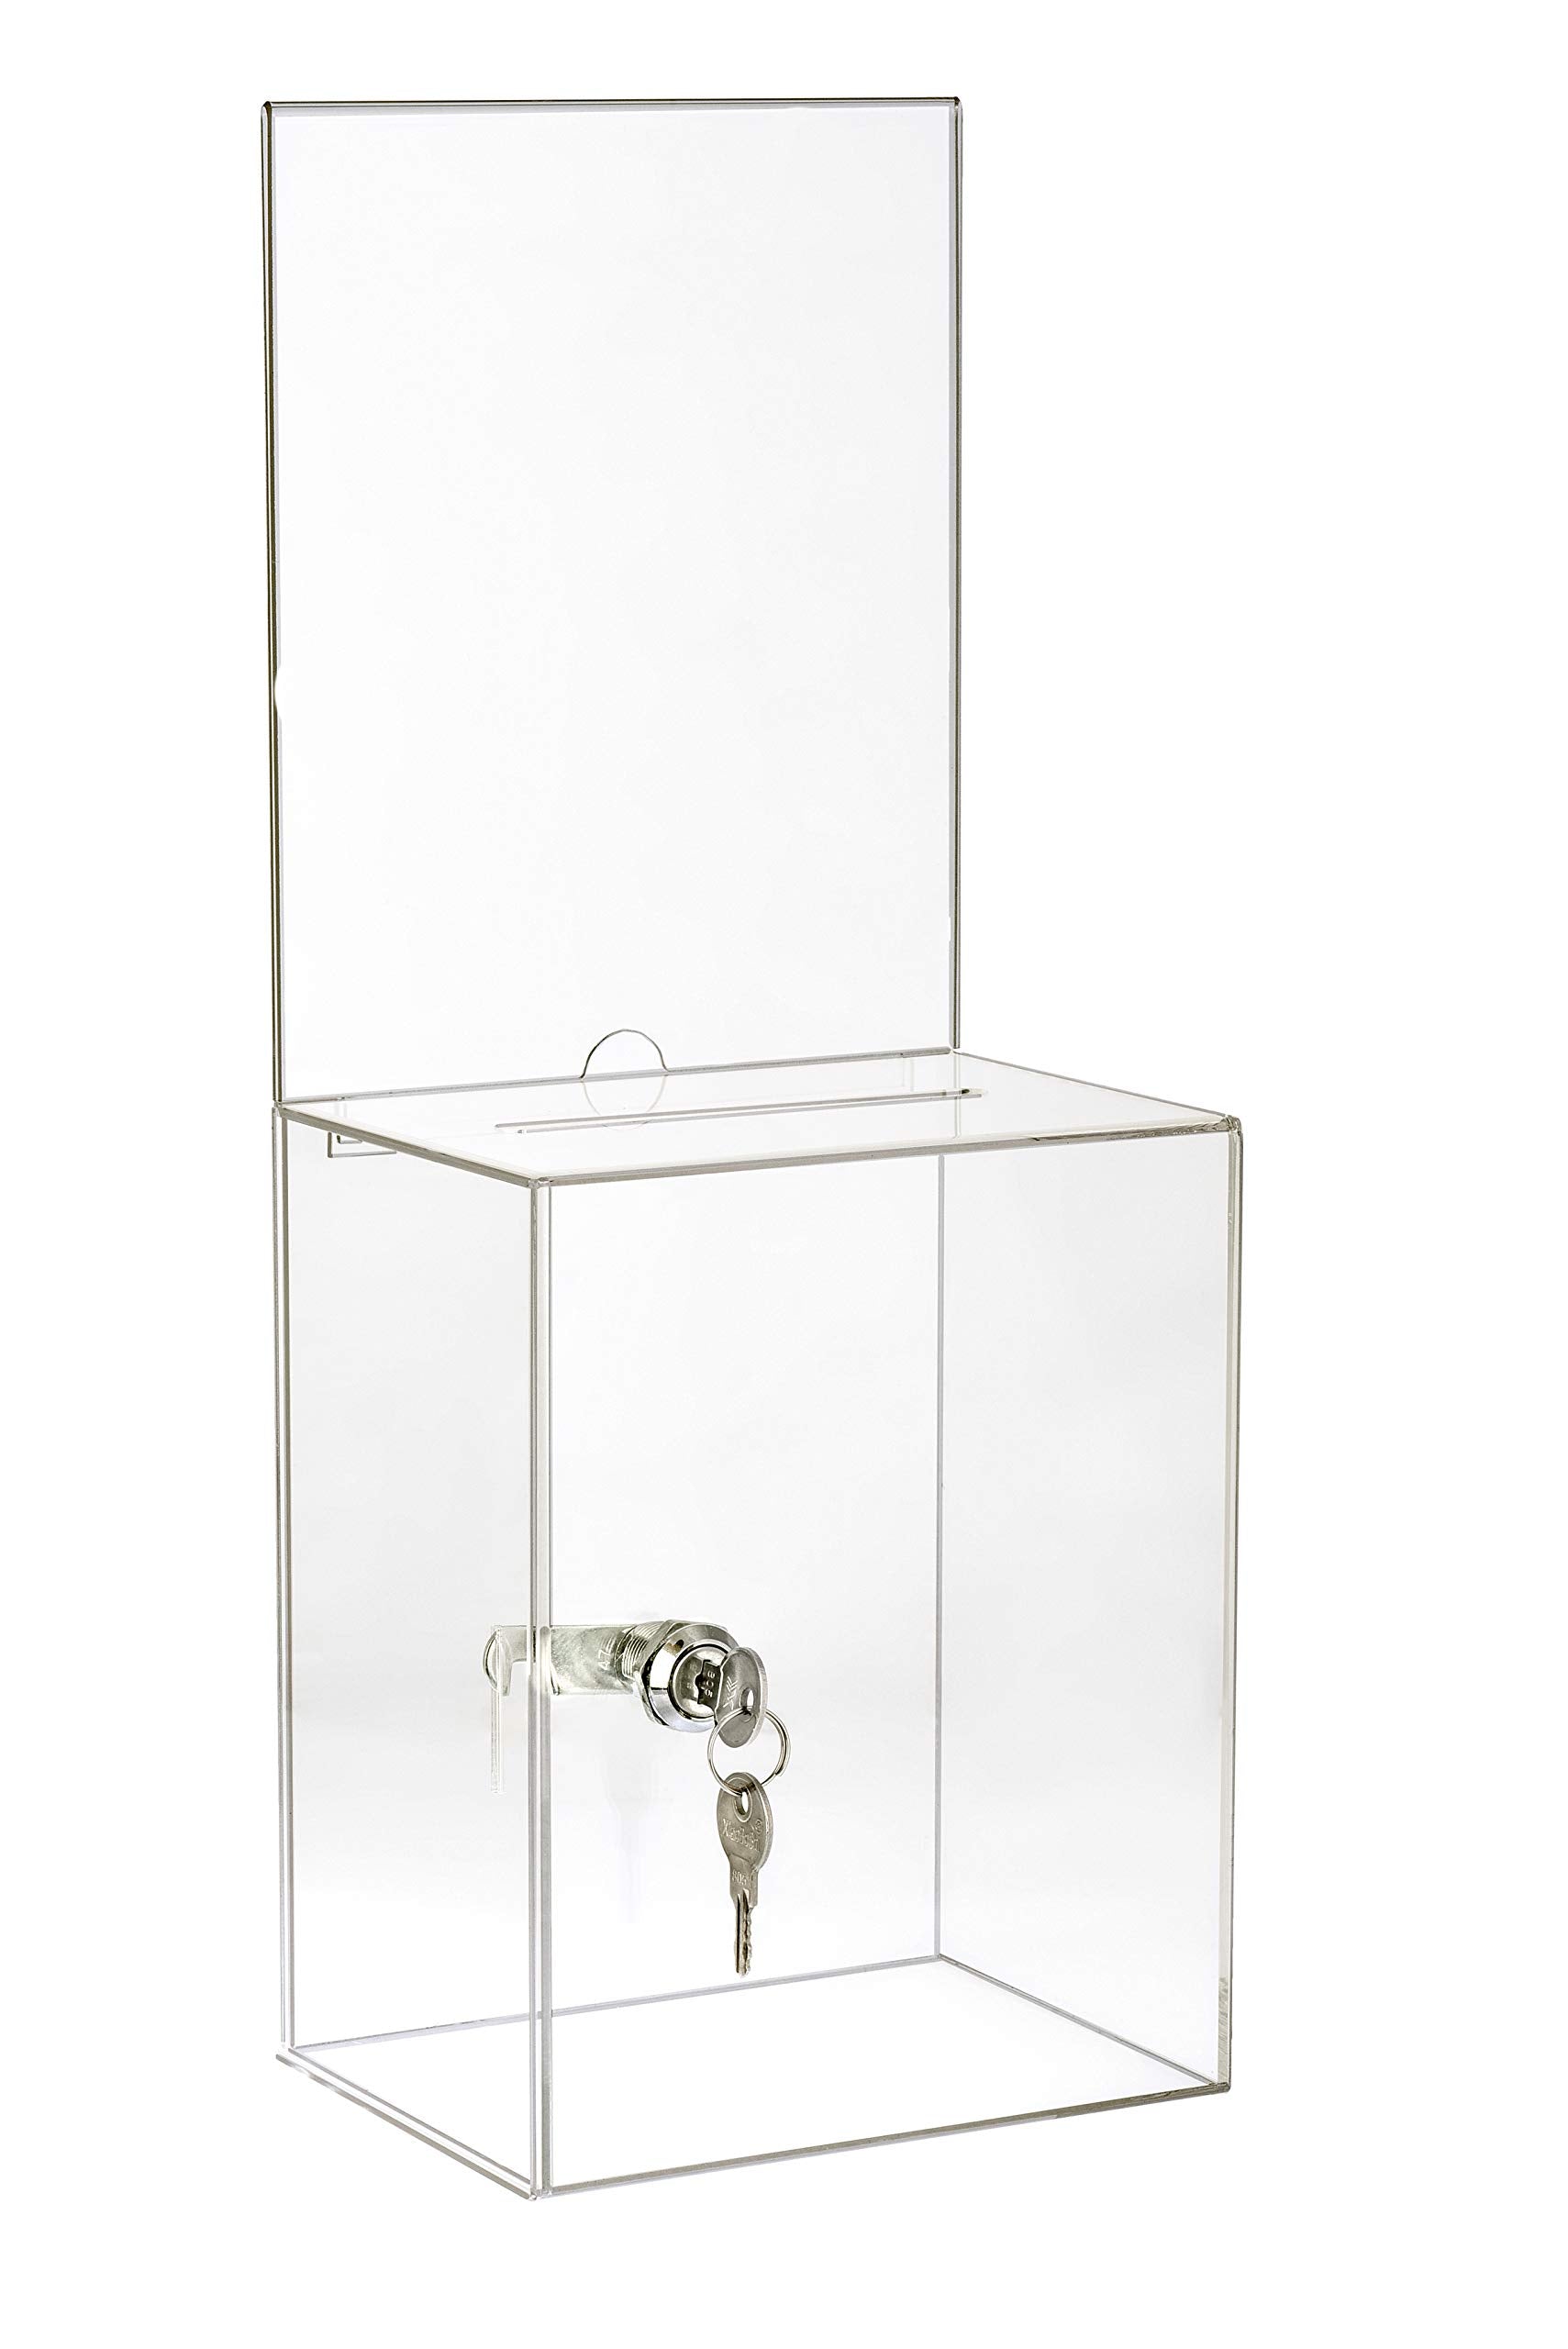 AdirOffice Tall Acrylic Suggestion/Donation Box - Wall Mountable Plastic Comments/Ballot Box w/Safety Lock for Cash, Suggestions & Employee/Customer Comment Cards  - Like New